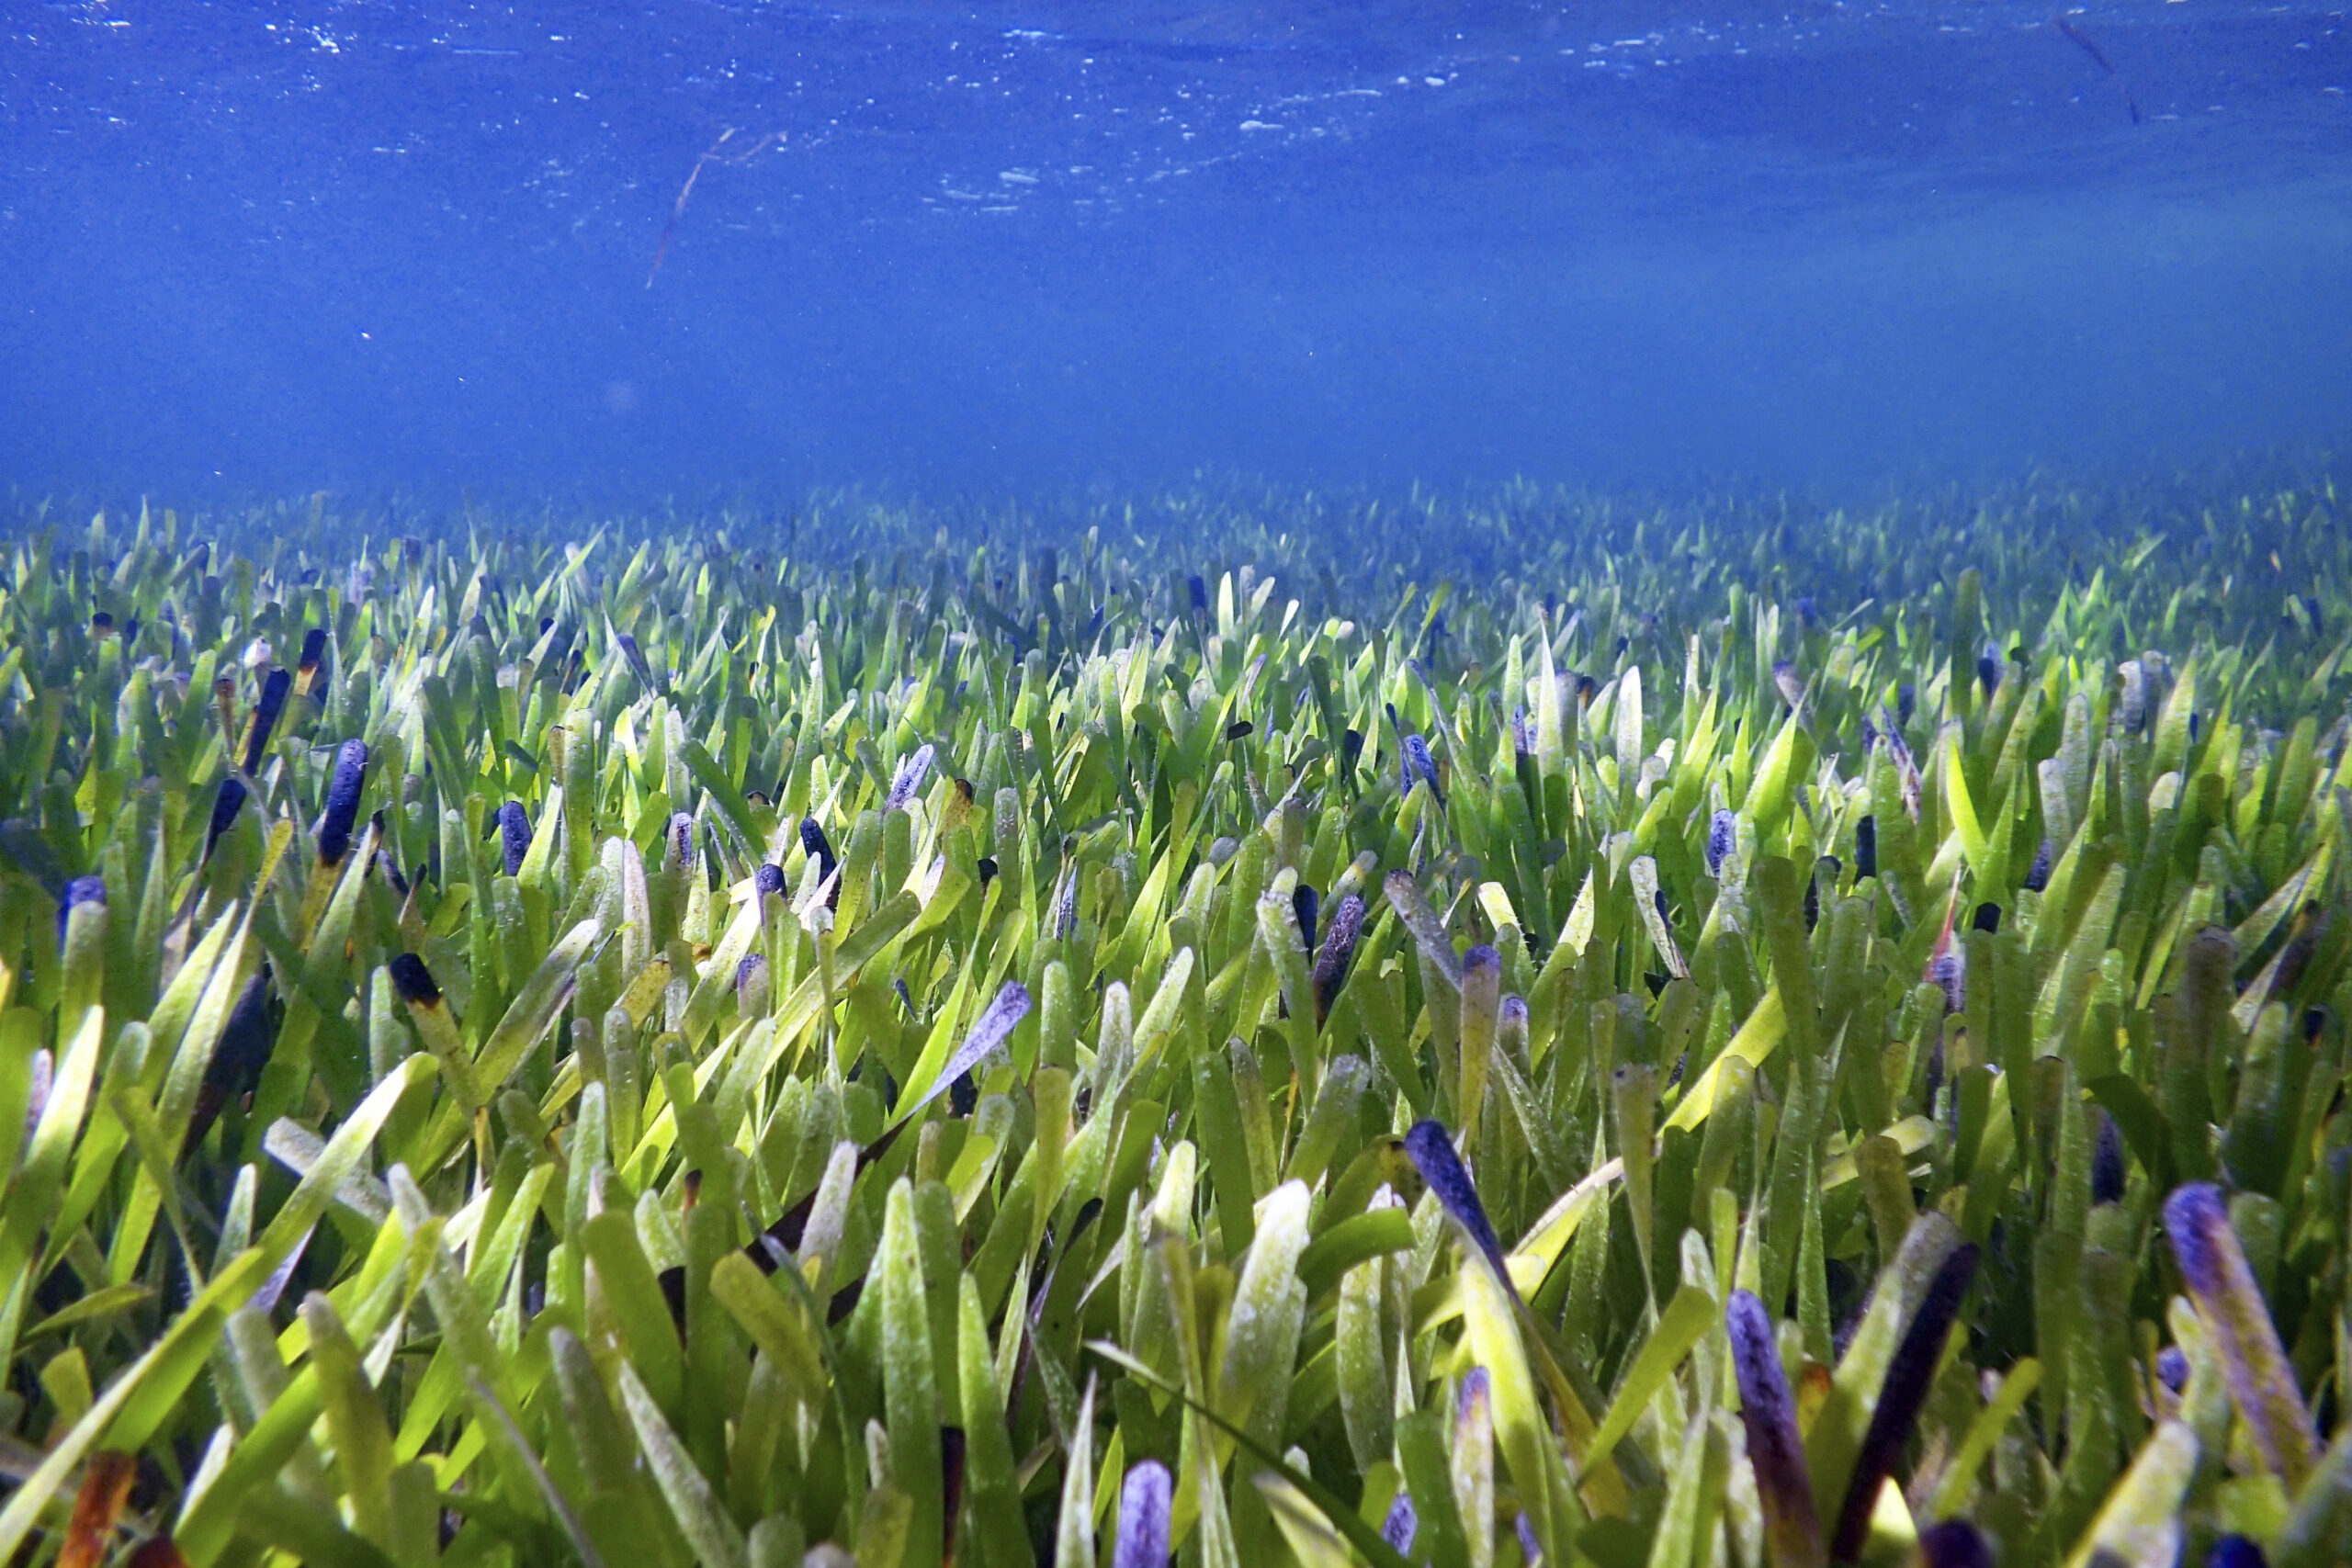 This August 2019 photo provided by The University Of Western Australia shows part of the Posidonia australis seagrass meadow in Australia's Shark Bay. According to a report released on Wednesday, June 1, 2022, genetic analysis has revealed that the underwater fields of waving green seagrass are a single organism covering 70 square miles (180 square kilometers) through making copies of itself over 4,500 years. (Rachel Austin/The University Of Western Australia via AP)